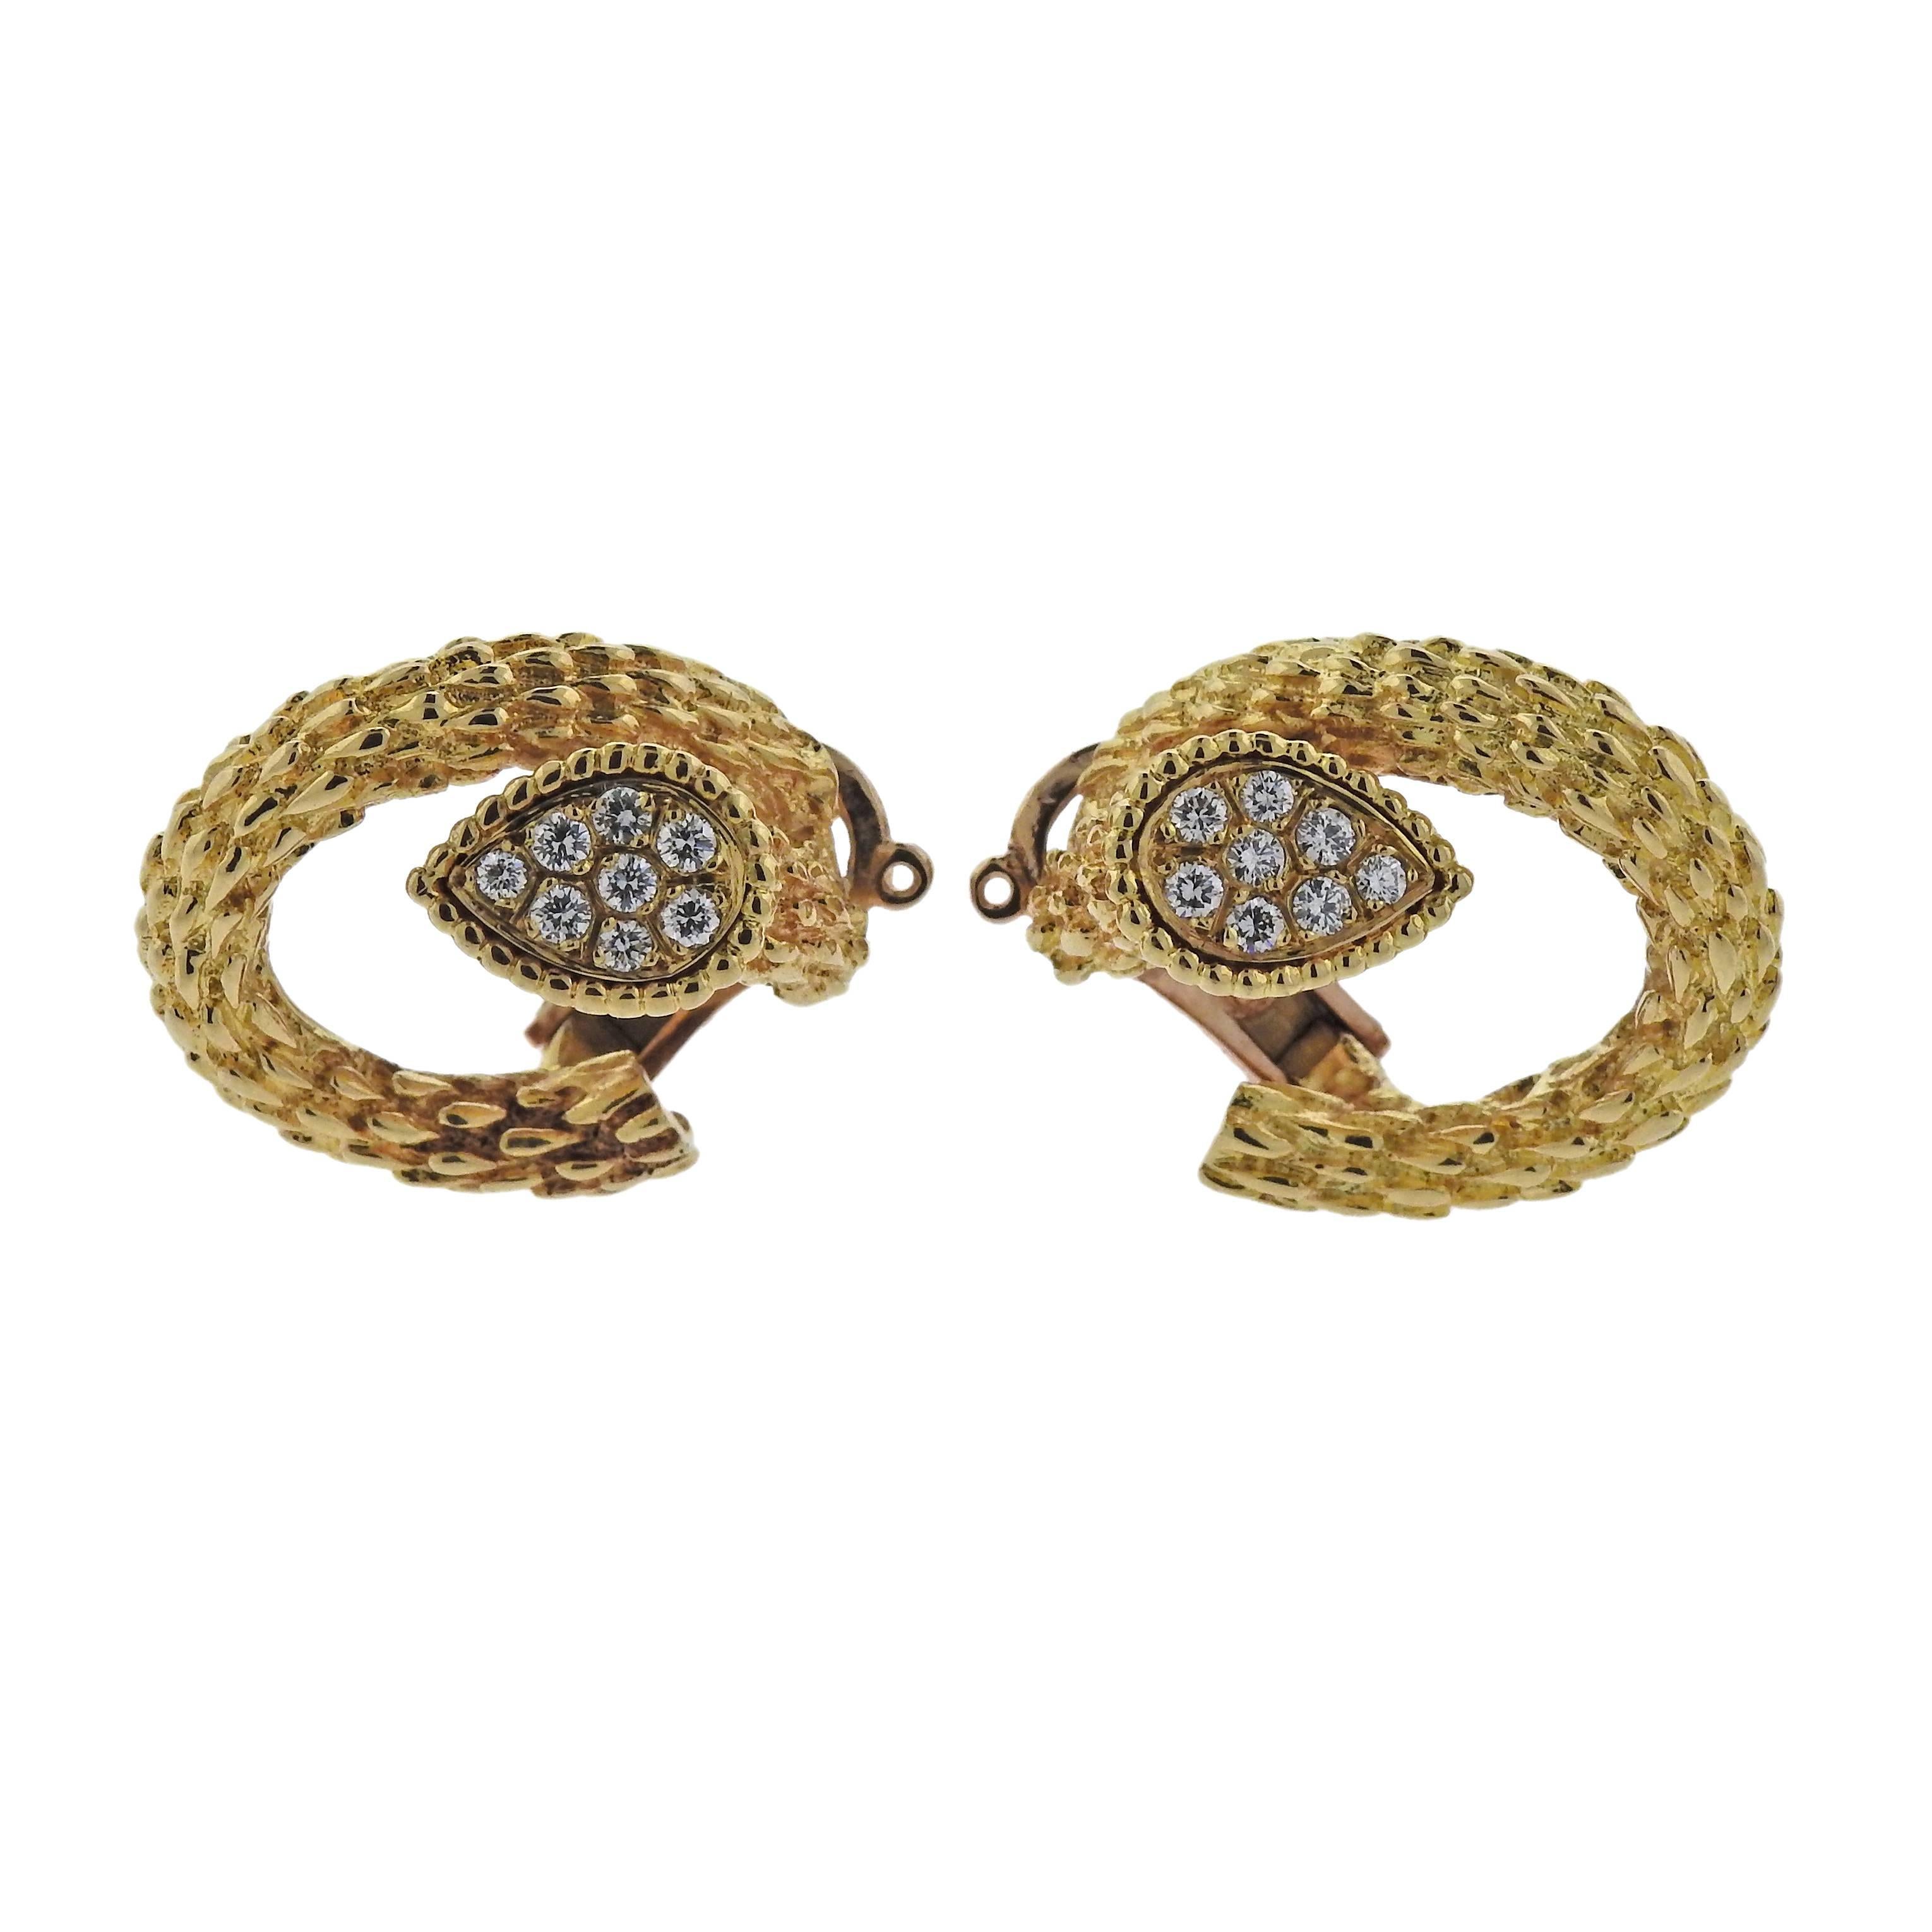 Pair of beautiful 18k yellow gold earrings, crafted by Boucheron, set with approximately 0.50ctw in G/VS diamonds. Earrings are 24mm x 21mm and weigh 20.7 grams. Marked: 497, or750, Boucheron.
